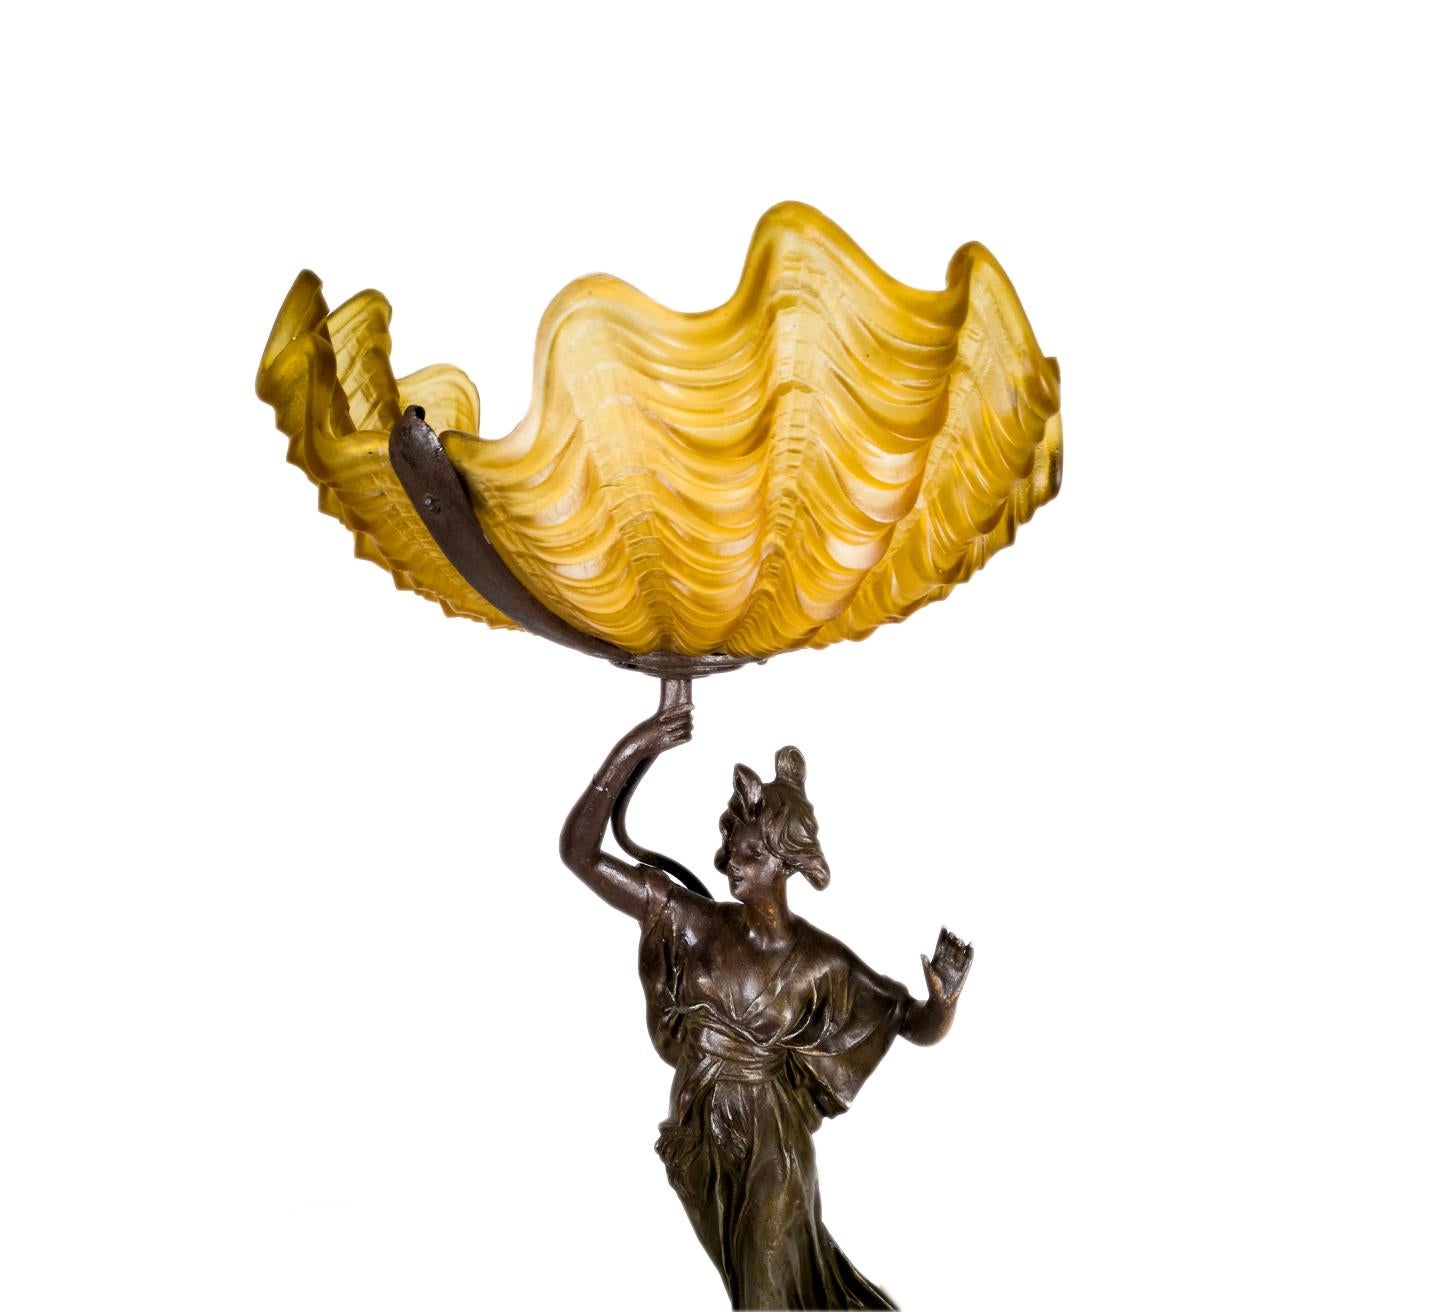 A 19th century Belle Époque Art nouveau french spelter sculpture statue lam of a woman holding a illuminated  yellow tulip shaped glass.